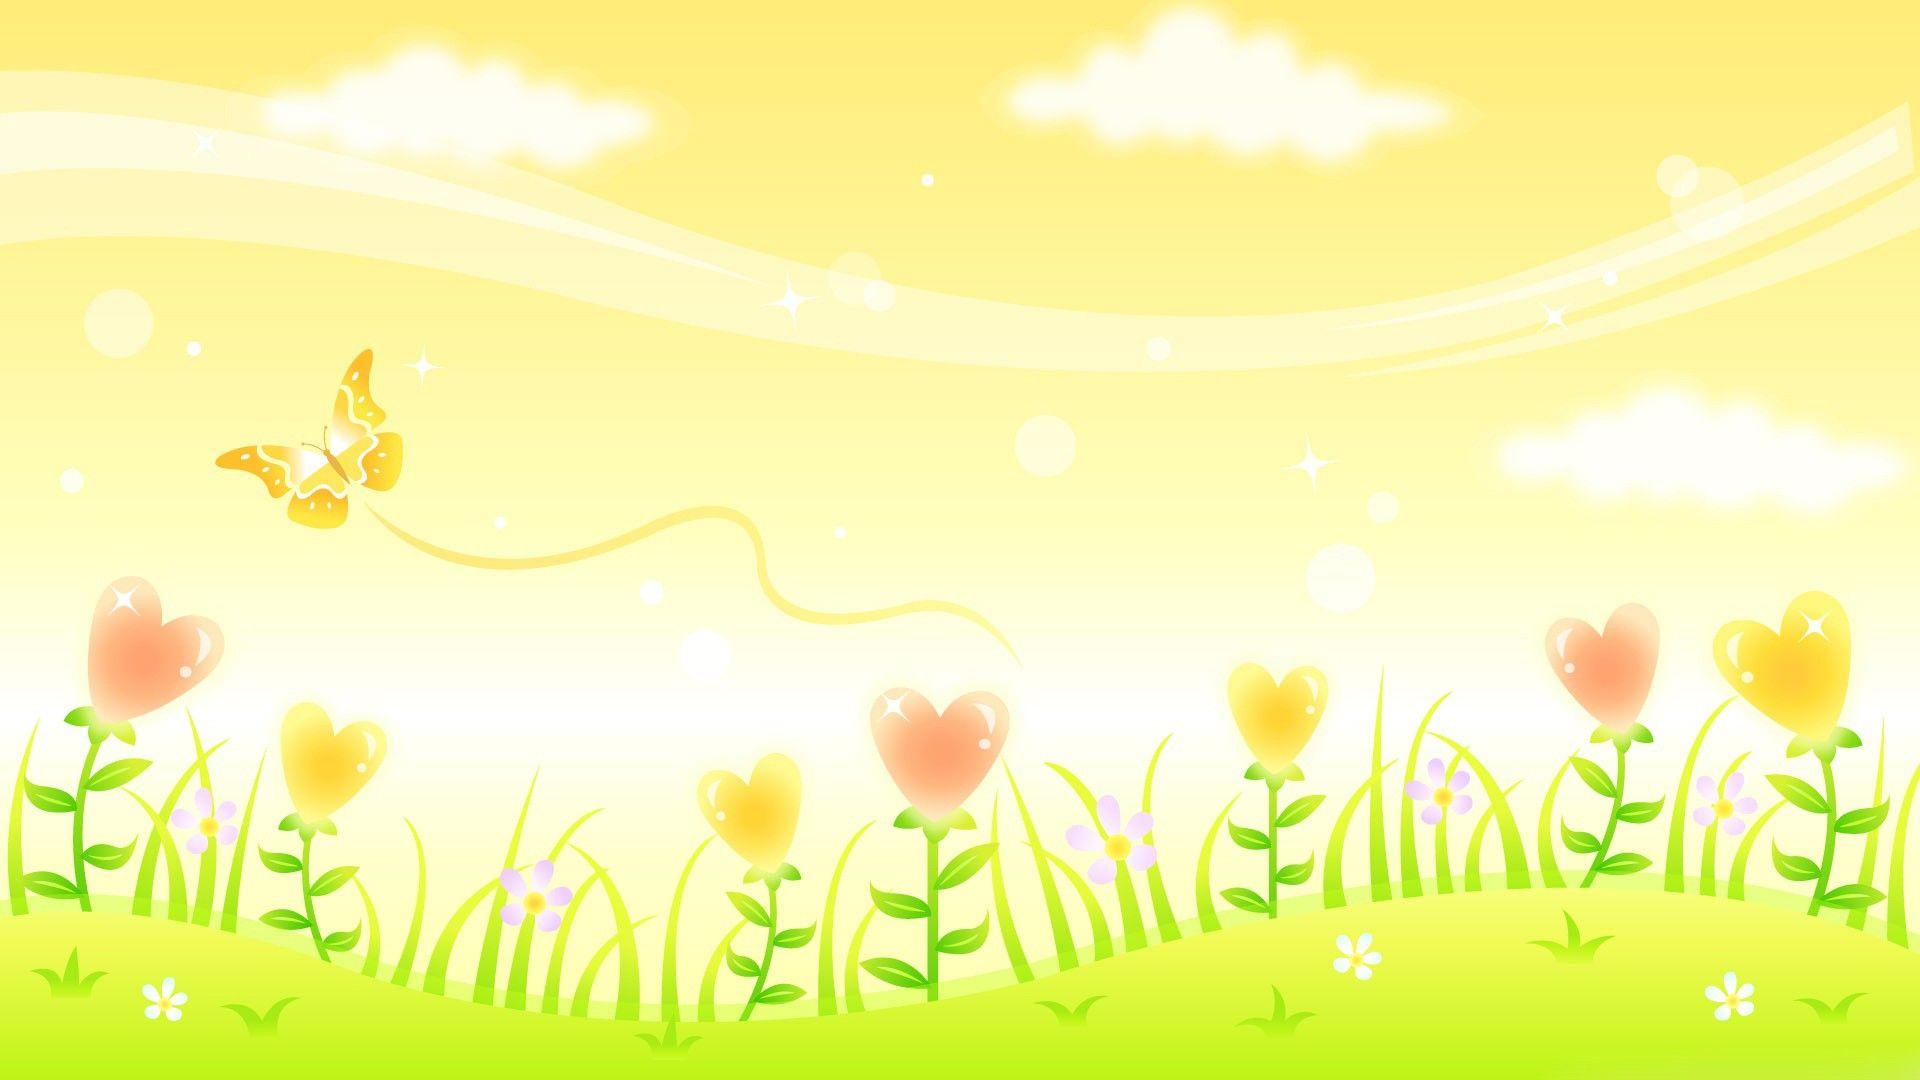 Happy backgroundDownload free stunning HD background